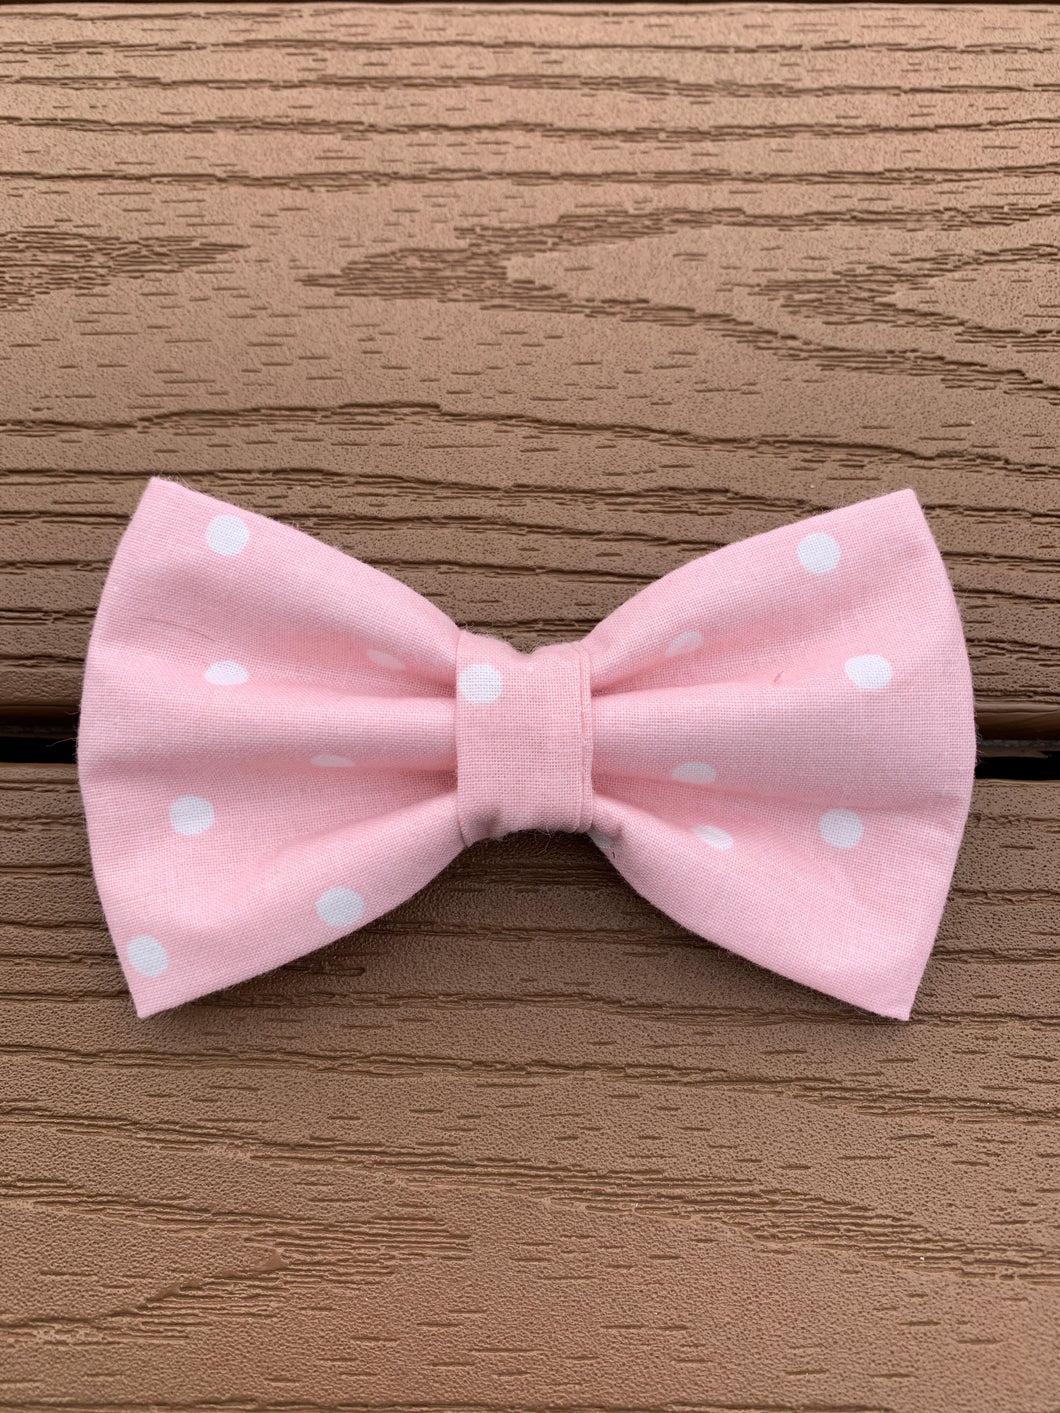 “Pink with white dots” Bow Tie